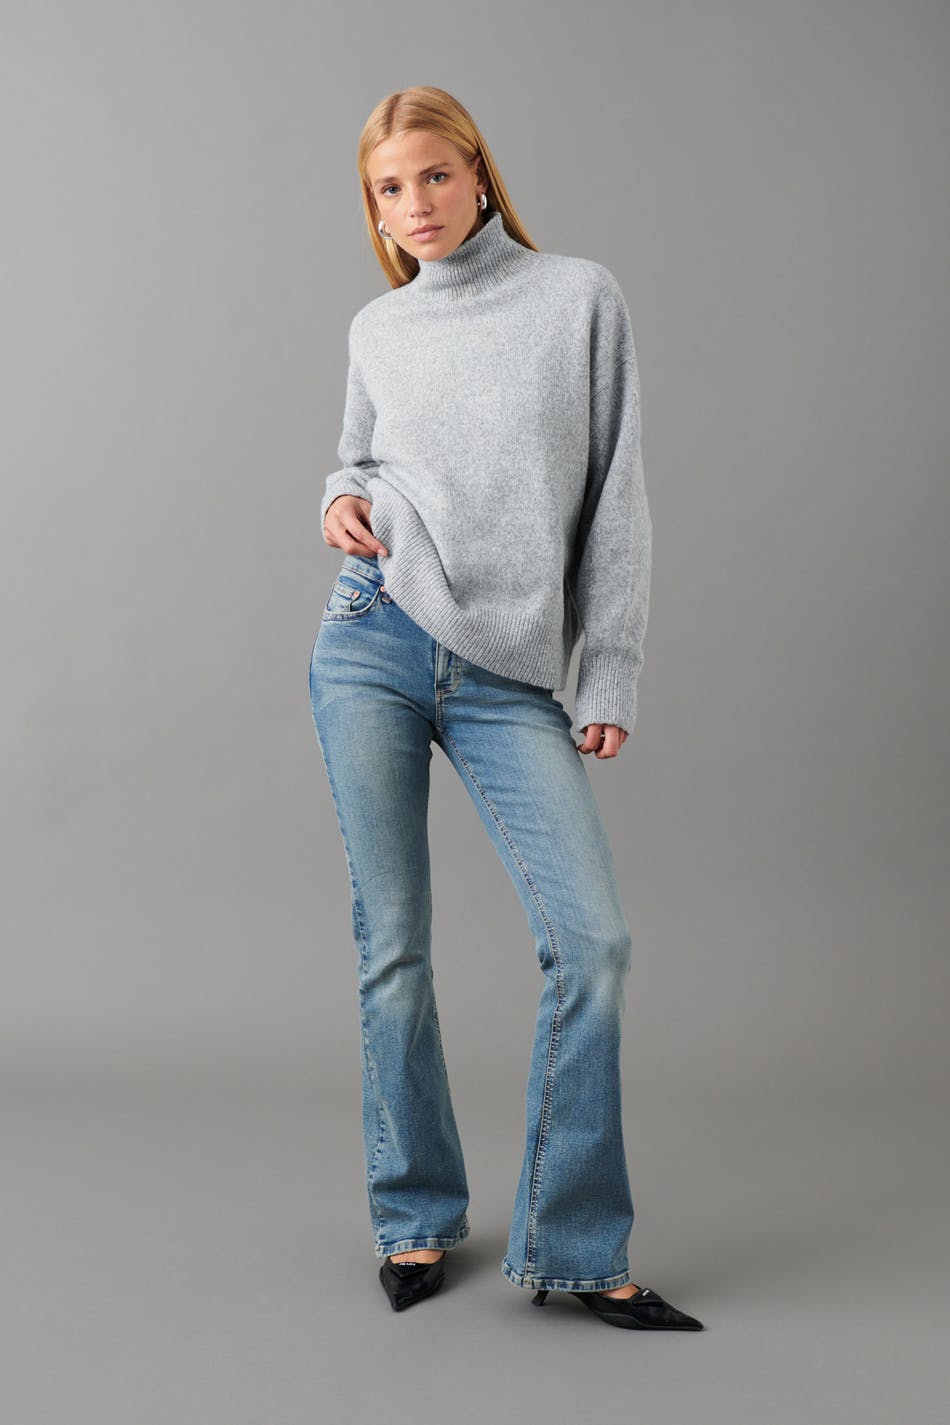 Low waisted jeans for women - Gina Tricot